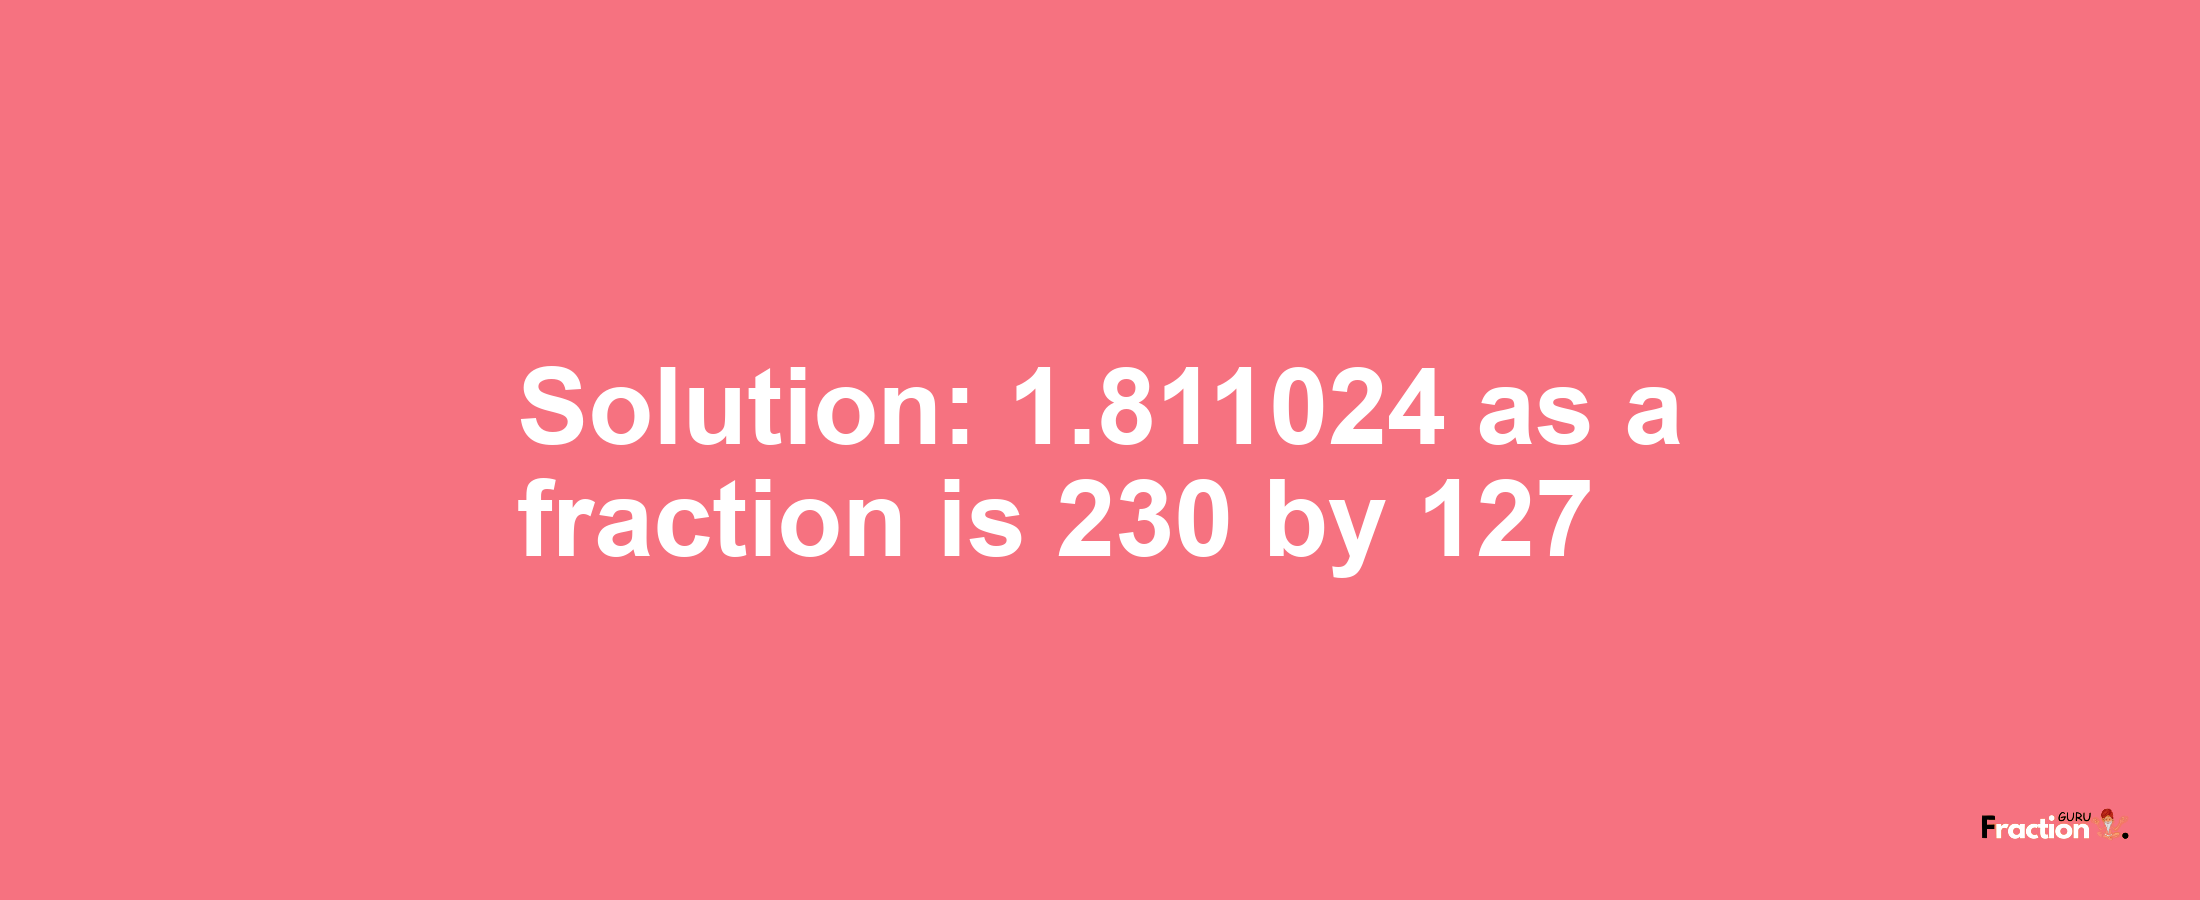 Solution:1.811024 as a fraction is 230/127